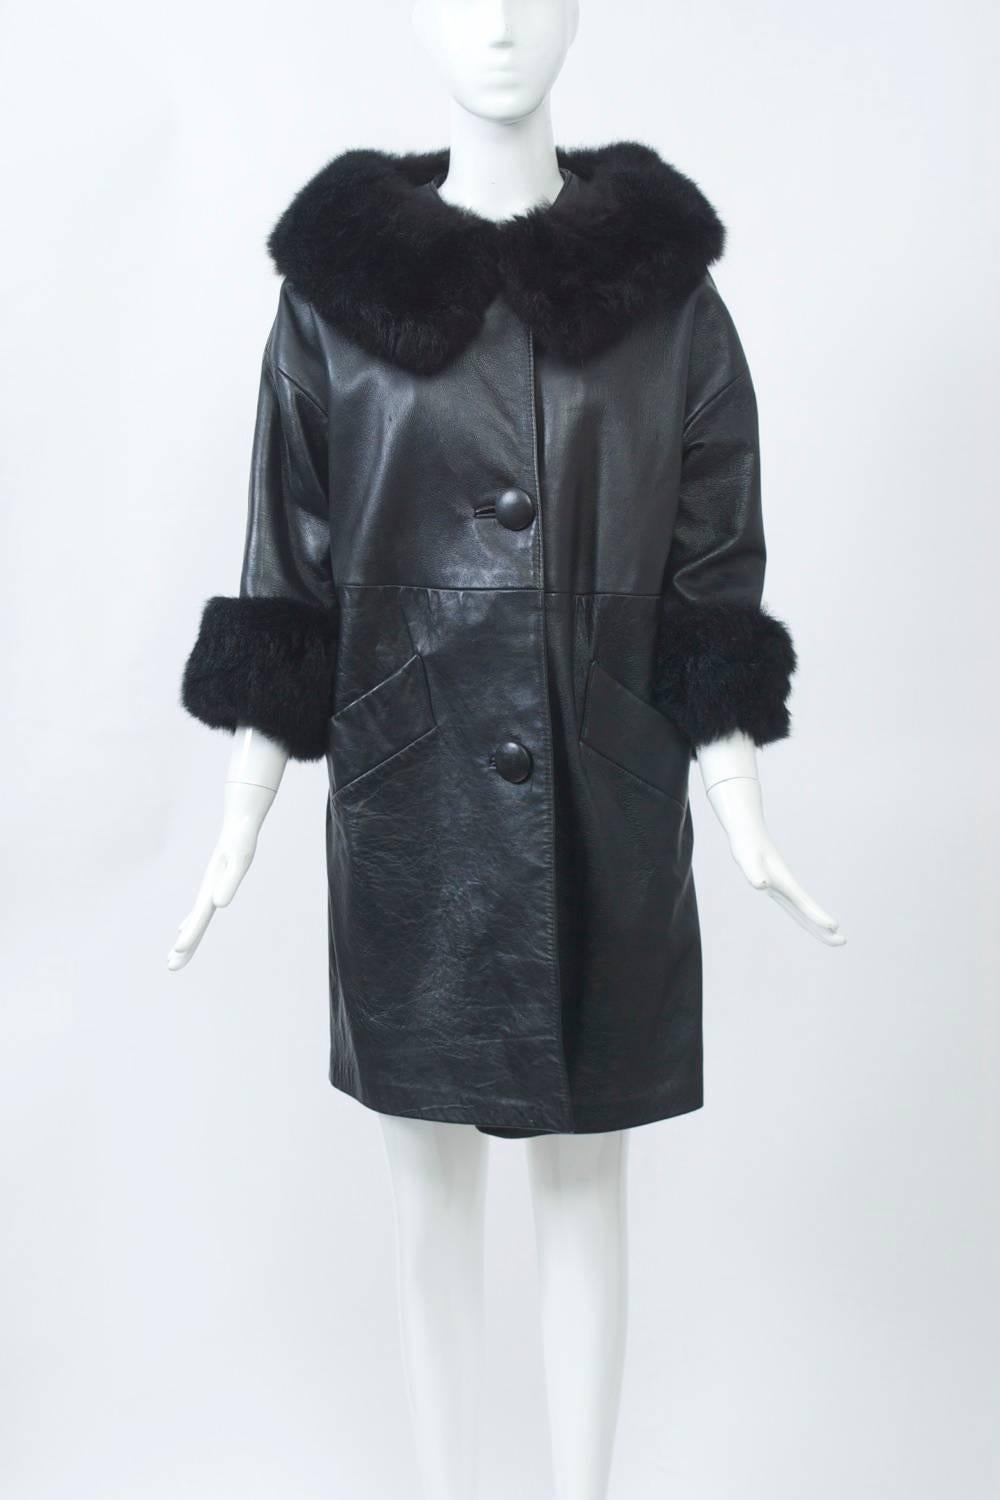 1960s short black leather coat with dyed opossum collar and cuffs. Straight cut, seamed around waist, with dropped shoulders and three-quarter sleeves. Slanted pockets and 3 large leather buttons. Red satin lining.